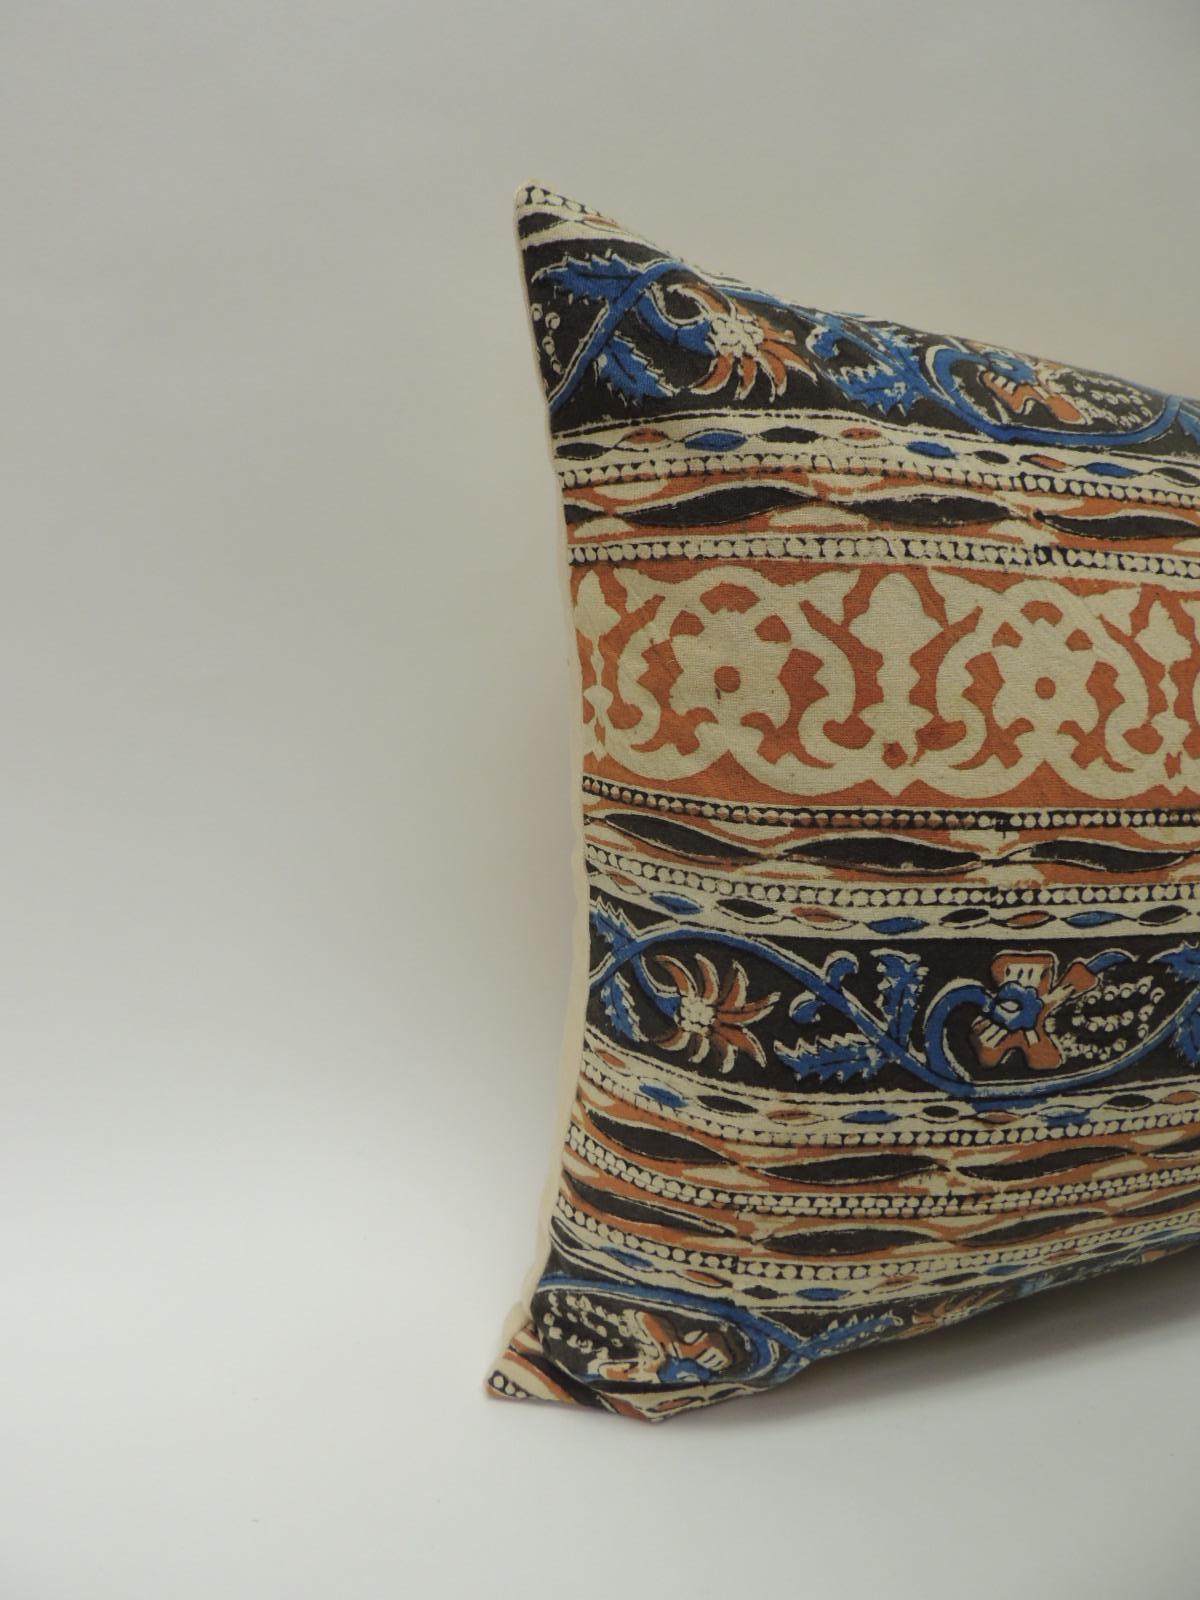 Vintage Indian hand-blocked artisanal textile decorative bolster pillow.
Decorative throw bolster pillow handcrafted with a hand-blocked floral vintage cotton artisanal Indian hand-blocked textile panel depicting horizontal stripes and finished